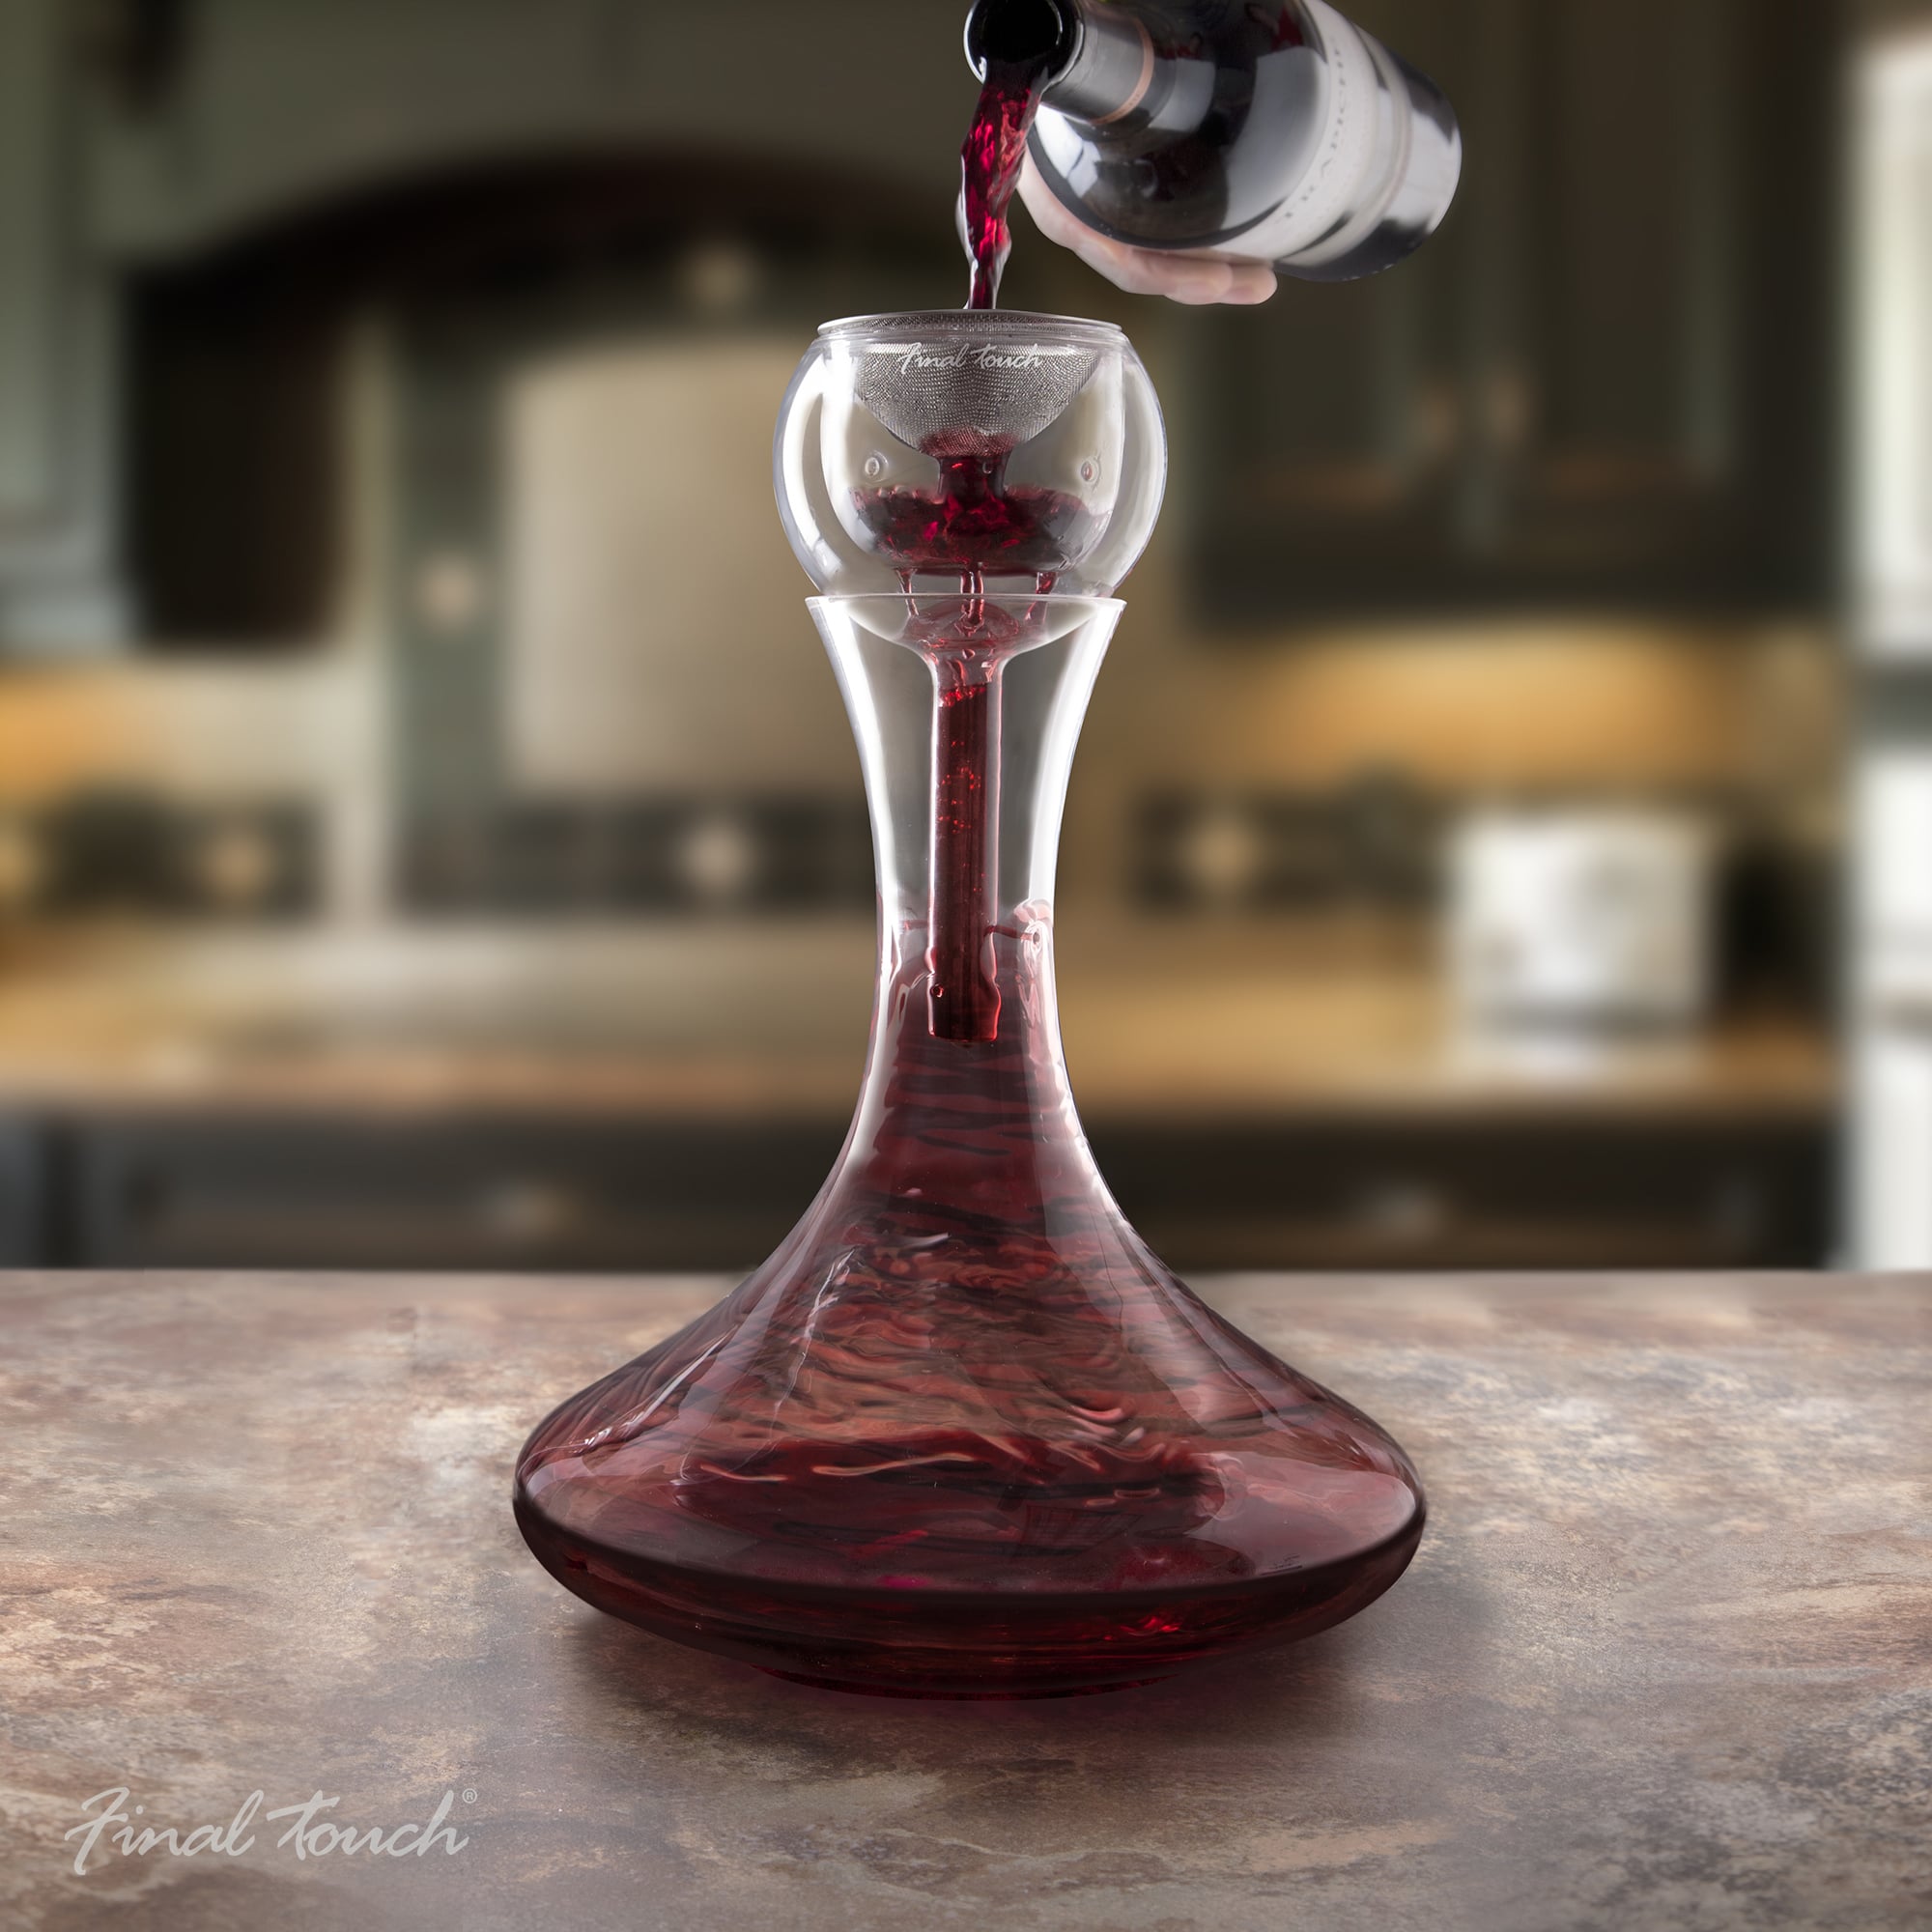 Final Touch Twister Wine Aerator Decanter -4087